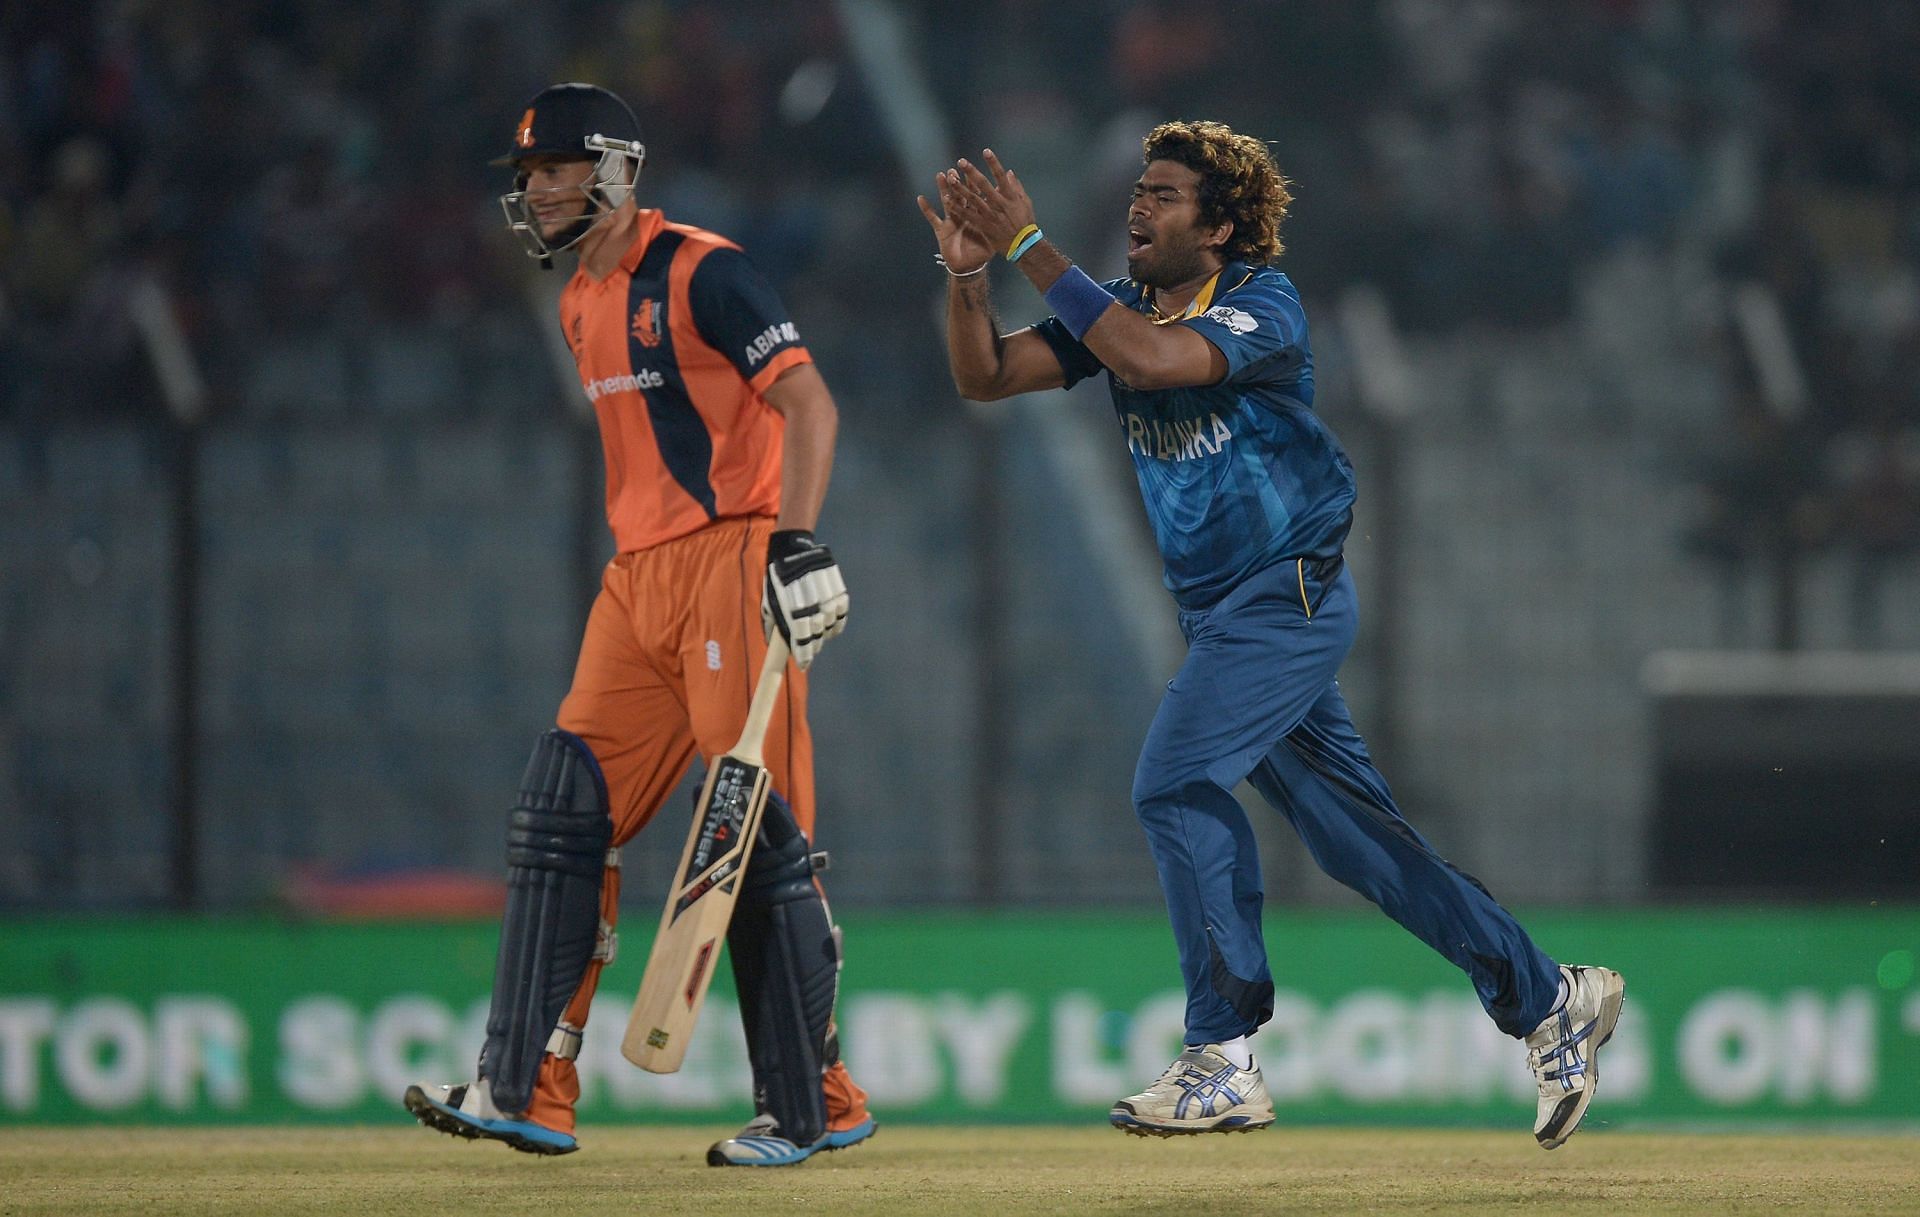 Sri Lanka destroyed the Netherlands batting lineup in T20 World Cup 2014 (Image: Getty)